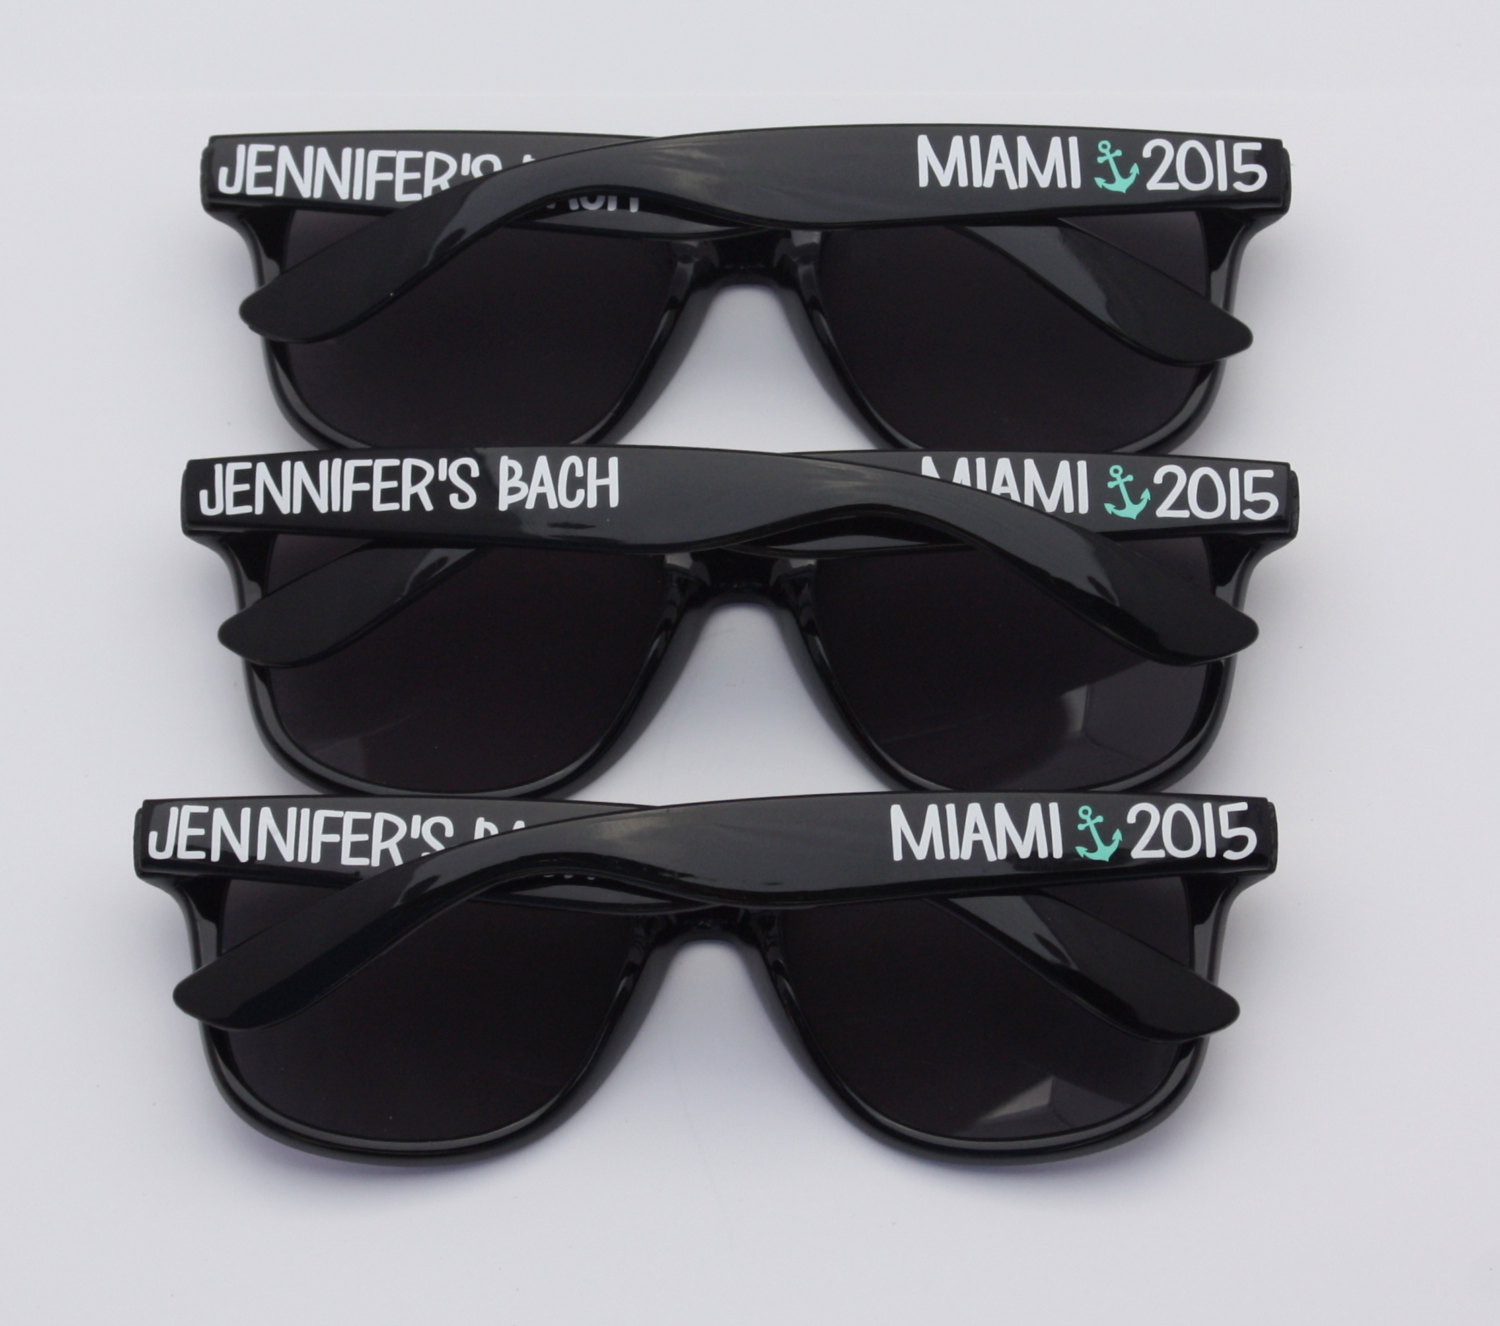 Sunglasses For Wedding Favors
 Personalized Sunglasses Wedding Favors Bachelorette Party